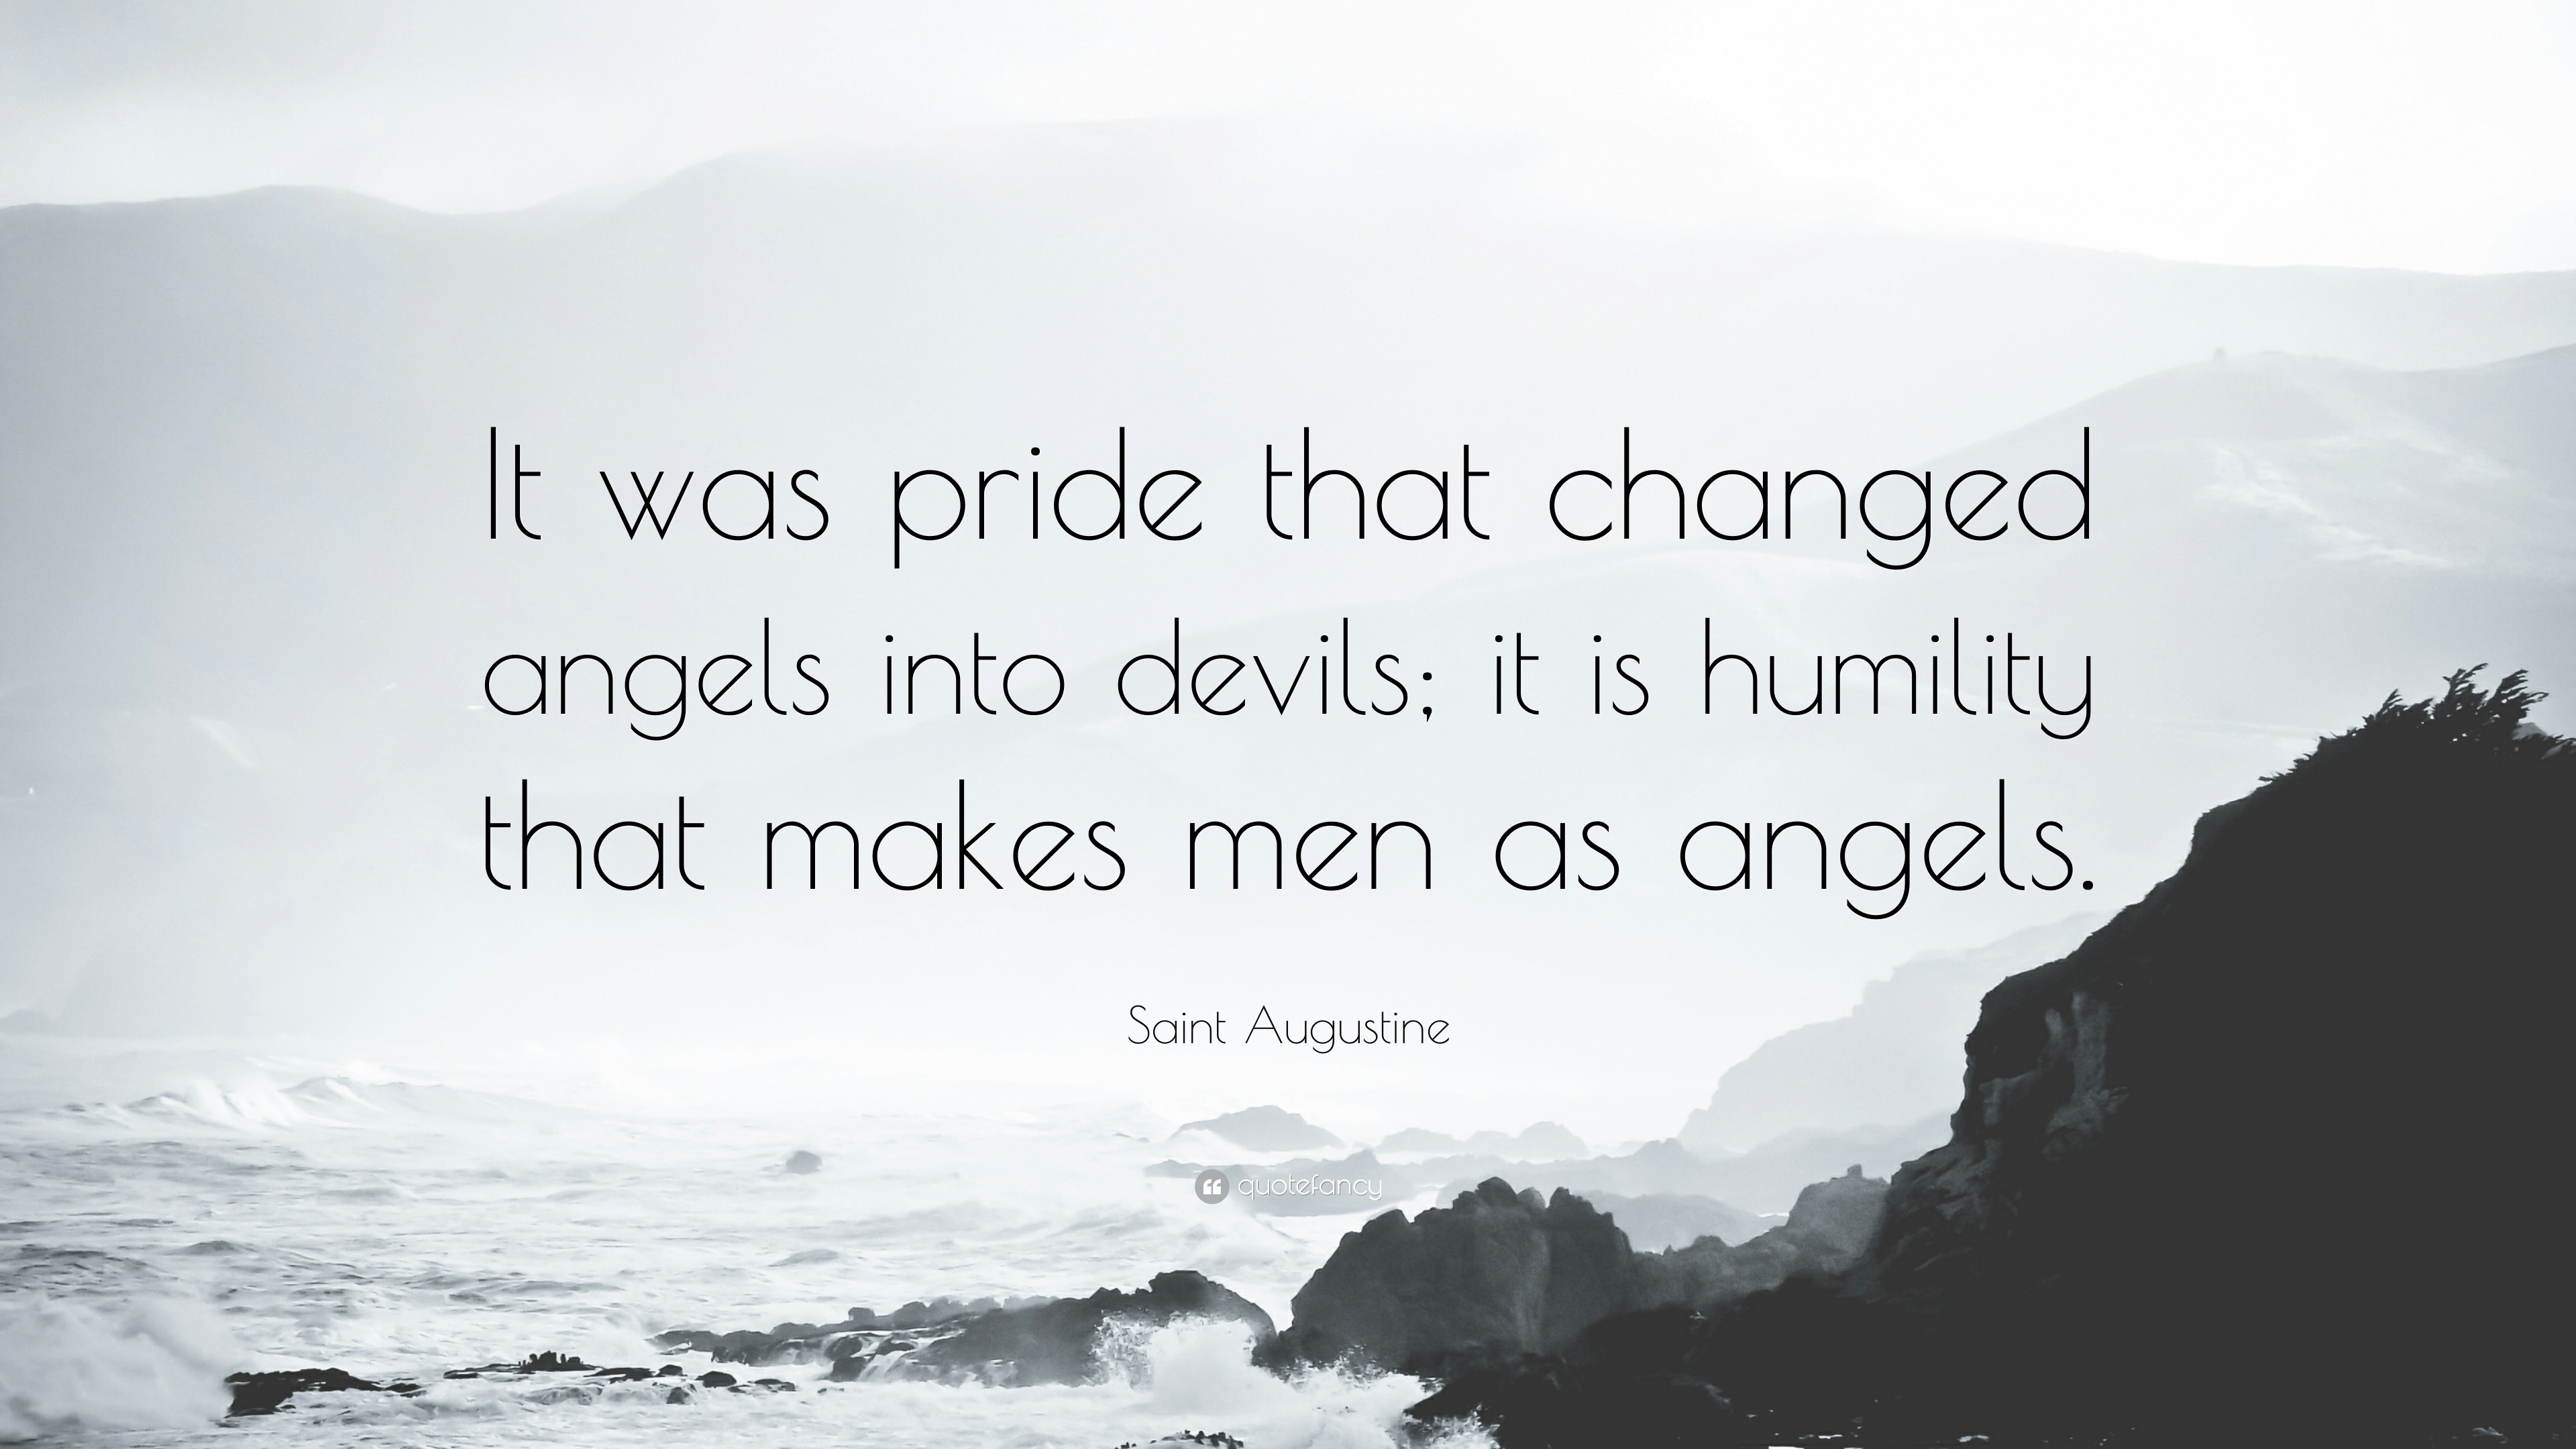 Saint Augustine Quote: “It was pride that changed angels into devils; it is  humility that makes